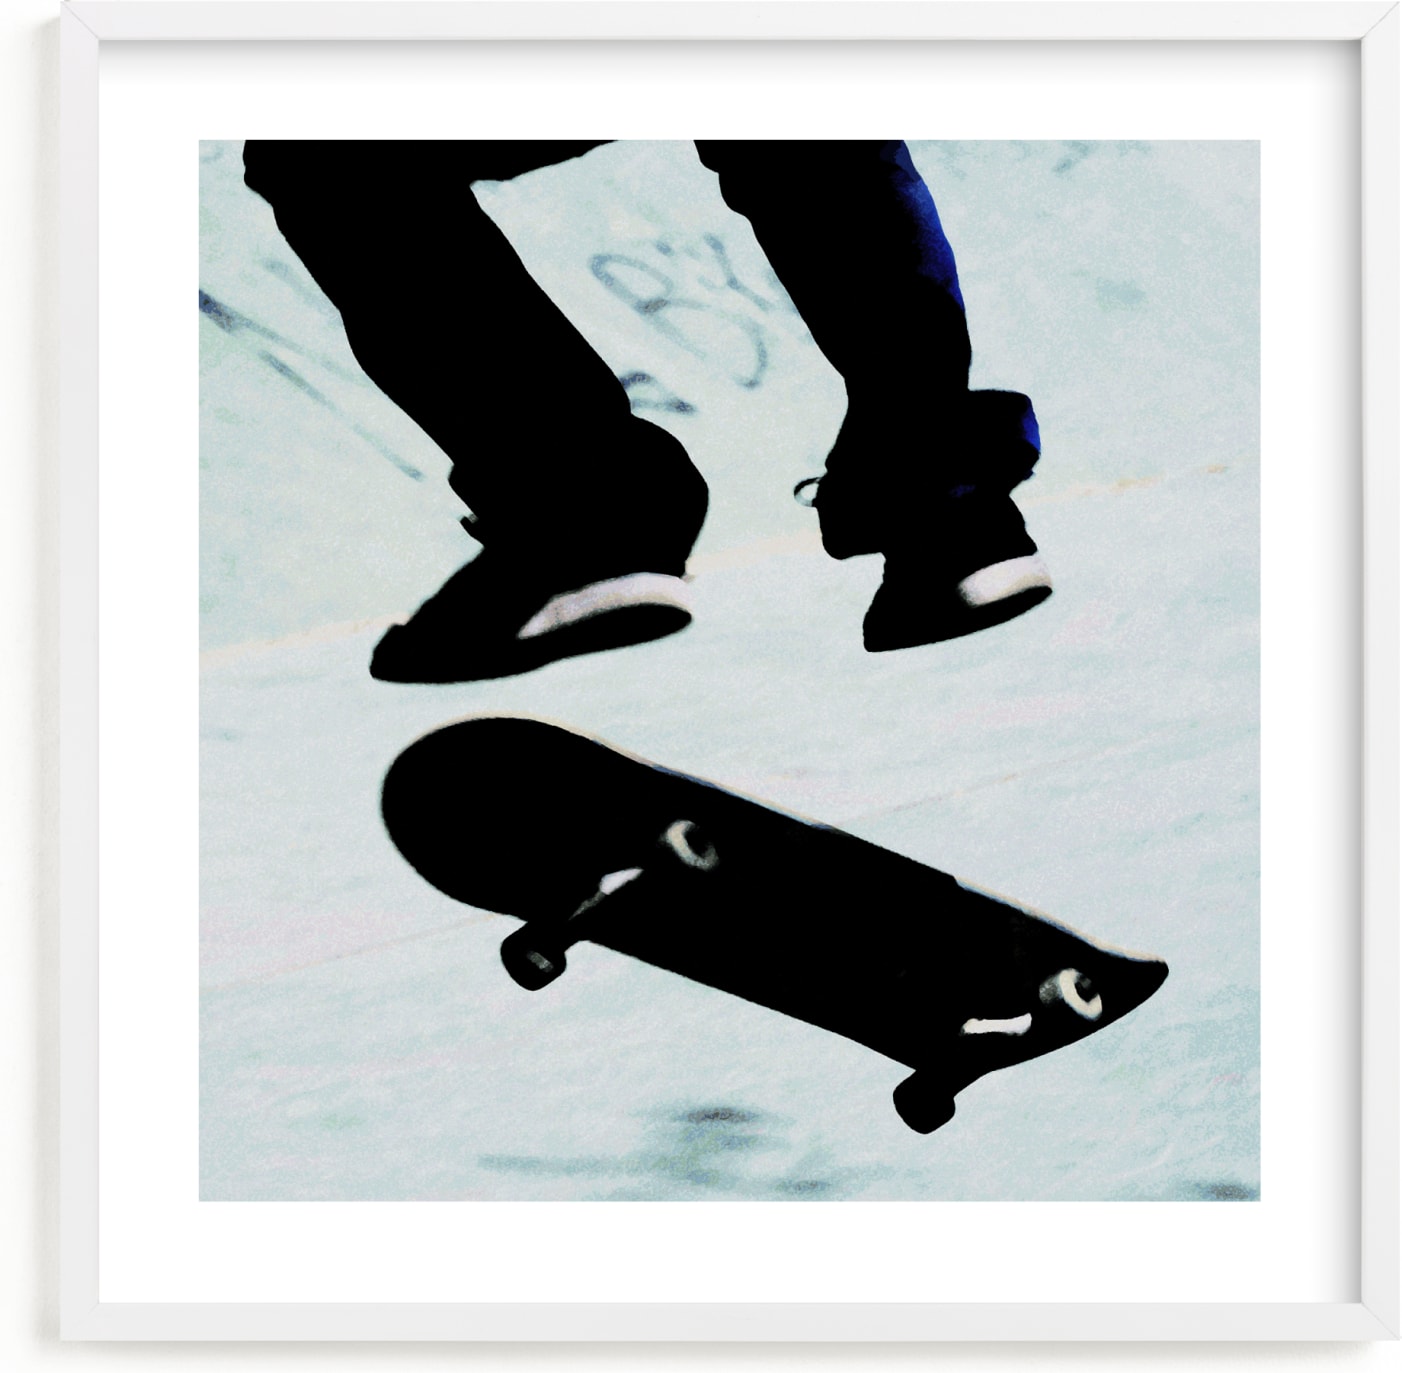 This is a blue kids wall art by Susanna Nousiainen called Skate.